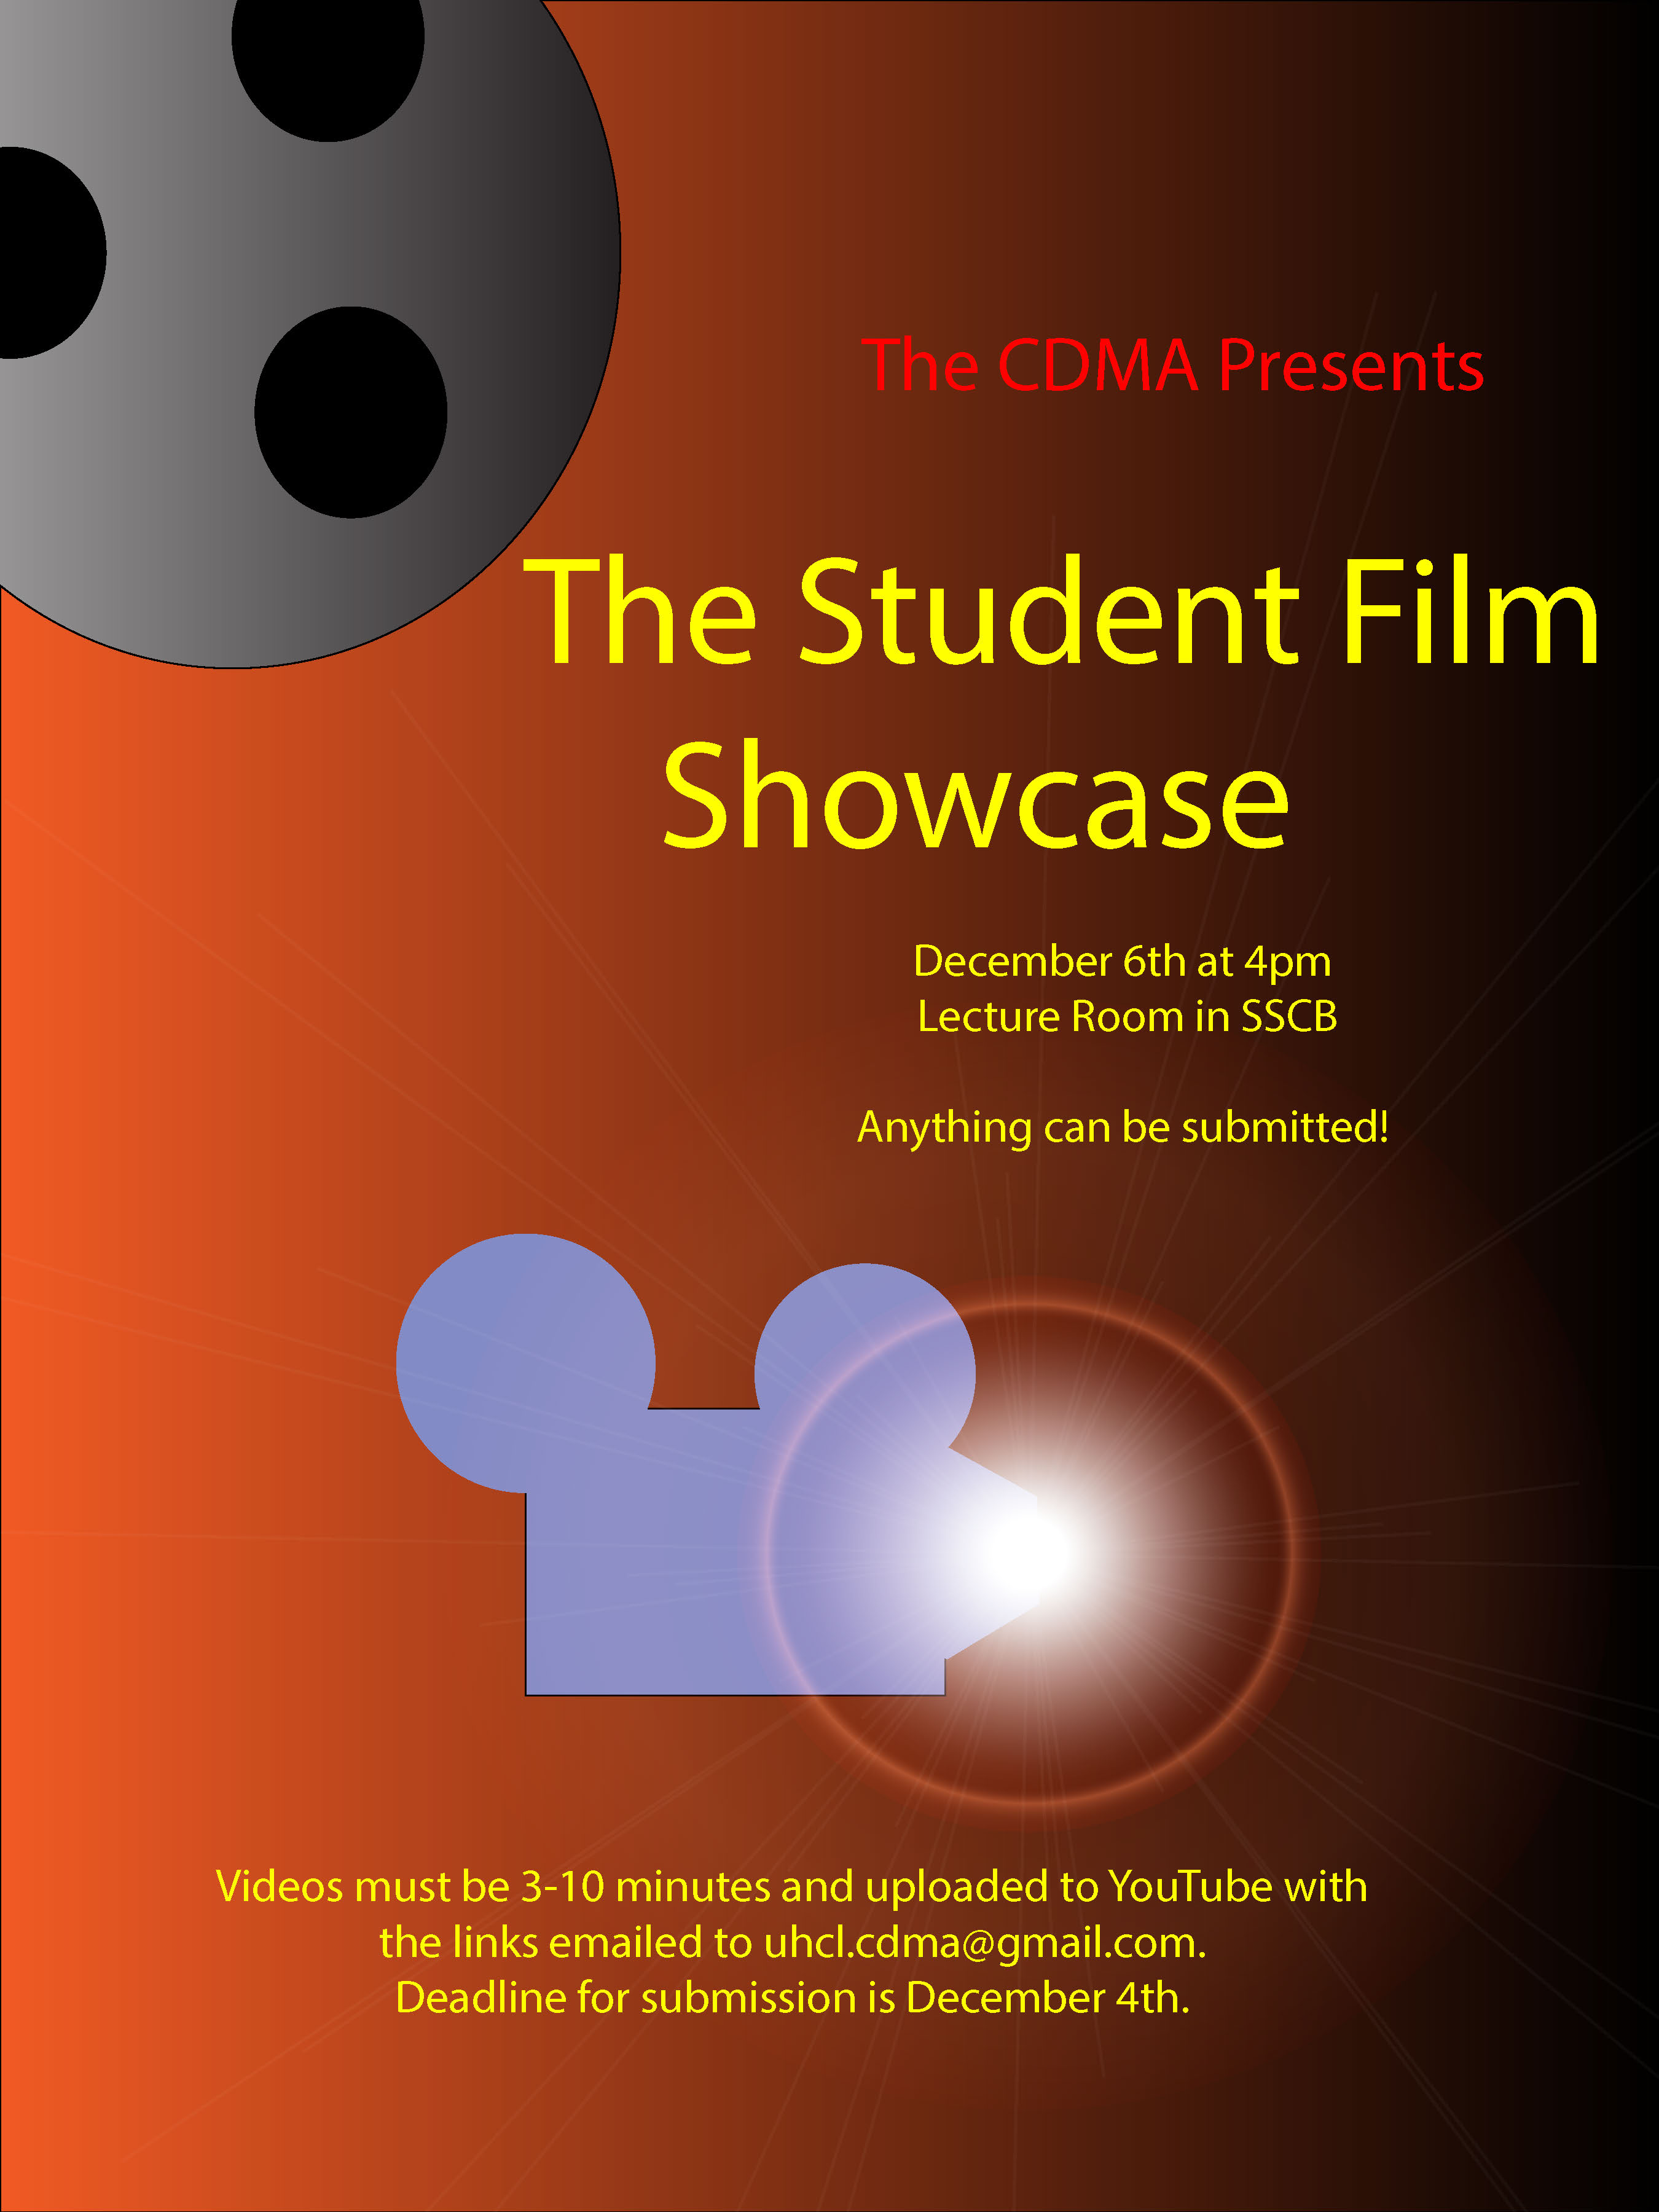 GRAPHIC: Flyer for the first Student Film Showcase during the fall 2017 semester. Photo courtesy of CDMA.